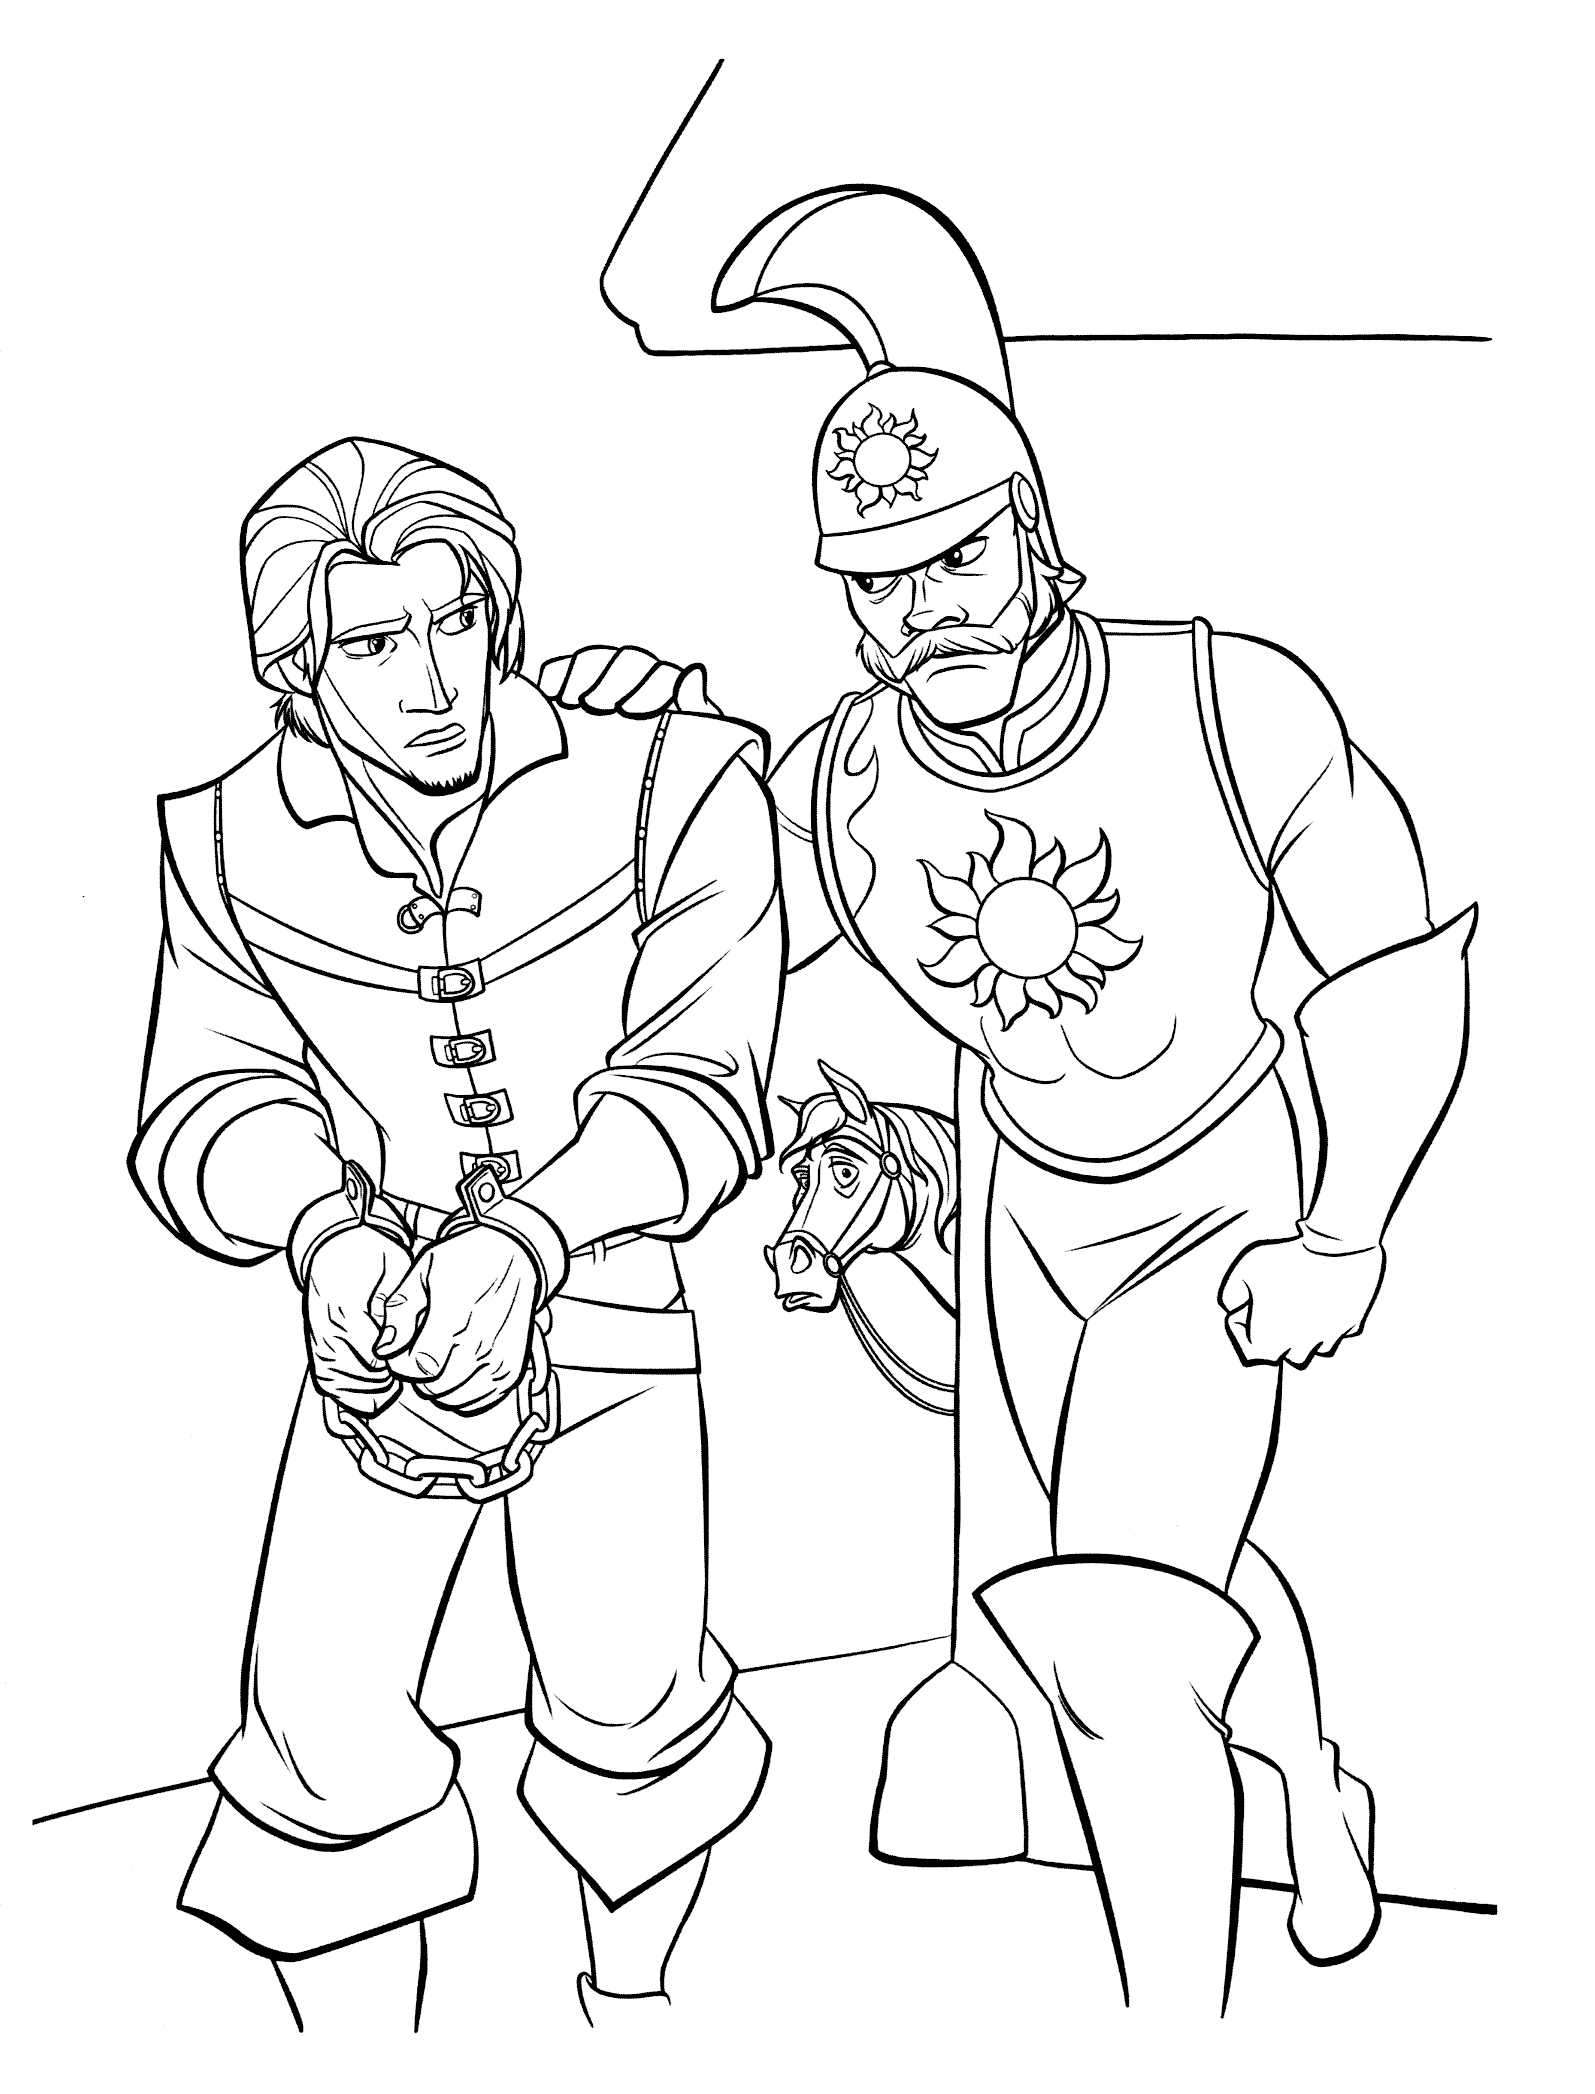 Coloring page - Flynn arrested